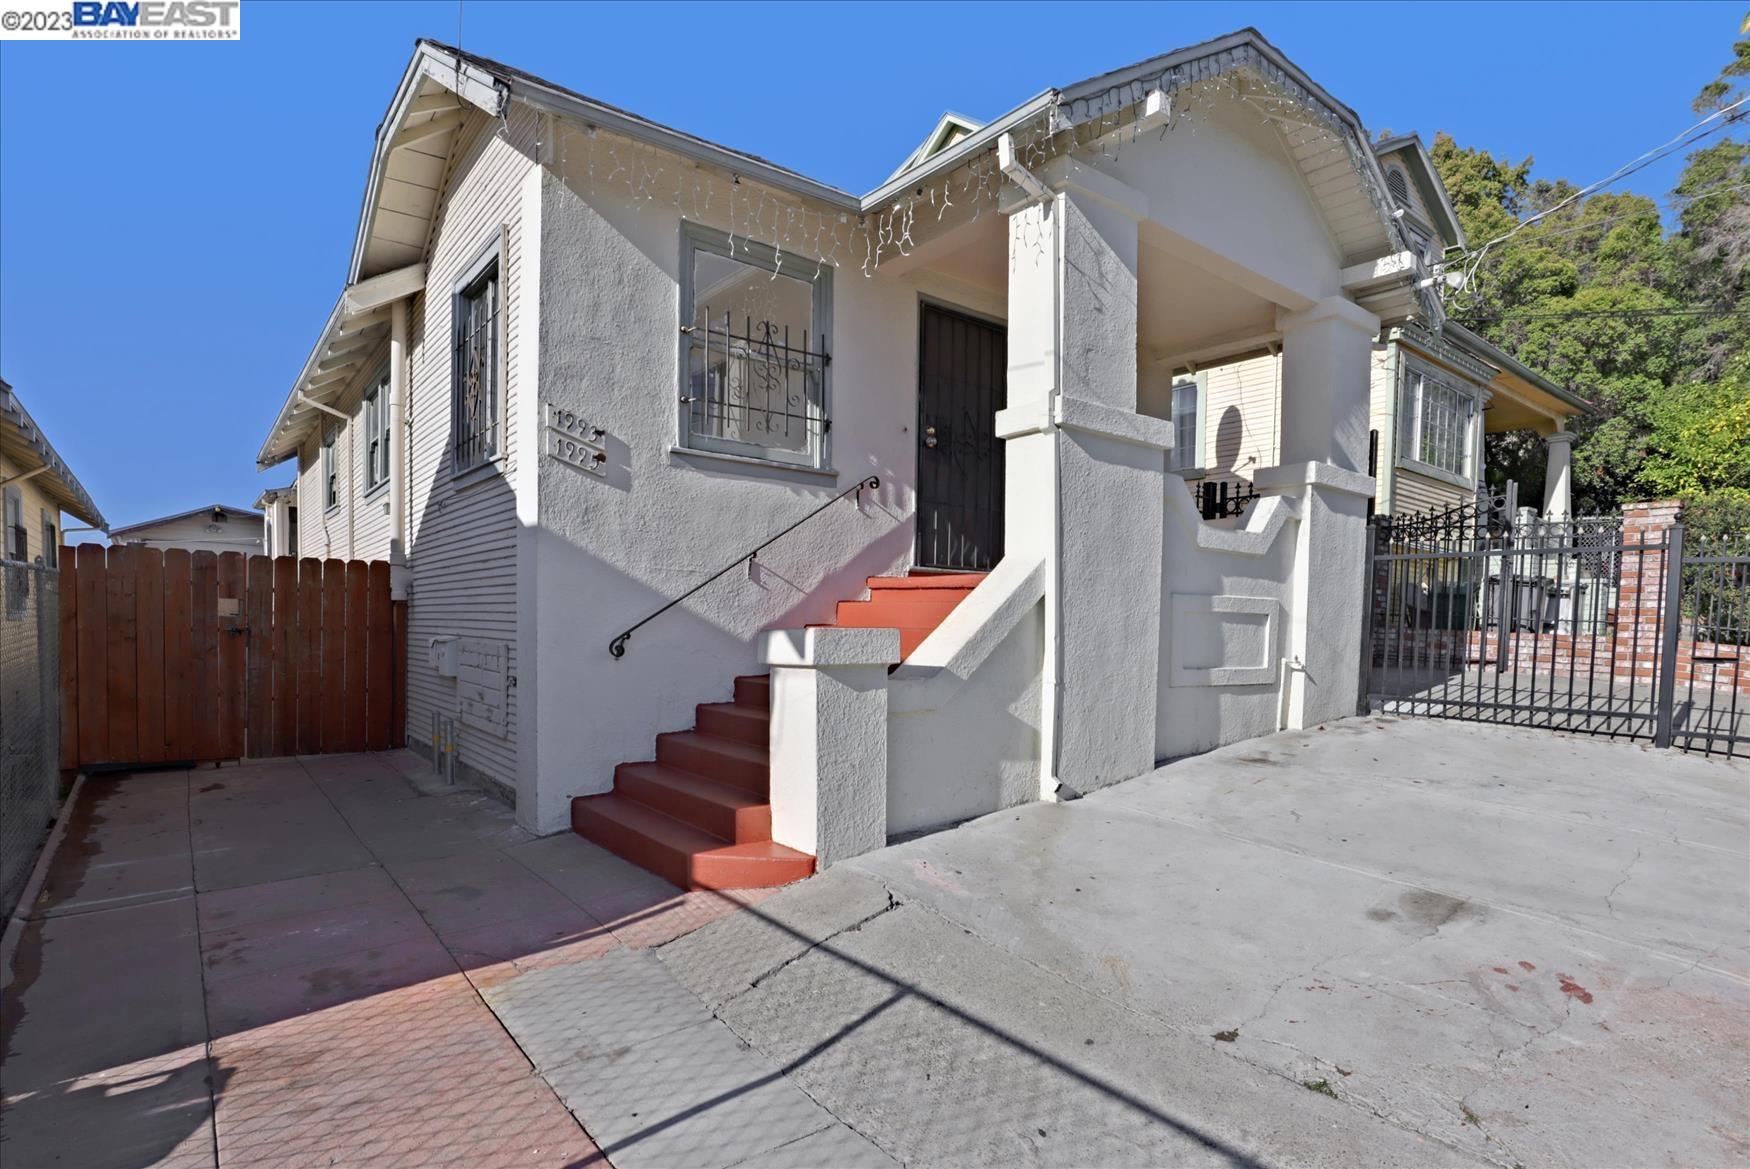 Located in the heart of Bay Area, close to Fruitvale BART station, Peralta District, and Fruitvale district neighborhood. The front unit of the home is a 3-bedroom 1-bath, and the back unit is a 1-bedroom and 1-bath. The sewer lateral is in compliance with building codes. Ideally suited for a buyer looking for a single family home with an added bonus of generating monthly income to go along with their purchase. The larger 3 bedroom and 1 bath unit features carpeting and wood floors throughout the large living space (over 1300 SQF). The kitchen has stainless steel appliances, cabinets, countertops, tile, and lighting to enhance the quality of the space. Kitchen looks out onto and connects to a long driveway and back units. There is hardwood flooring in the living room and dining room of the house. This very large lot of land offers a lot of potential for those who wish to add another unit to it, with a long driveway that can accommodate up to four cars, easy access to the I-580 freeway, and close proximity to multiple markets, shops, and banks.